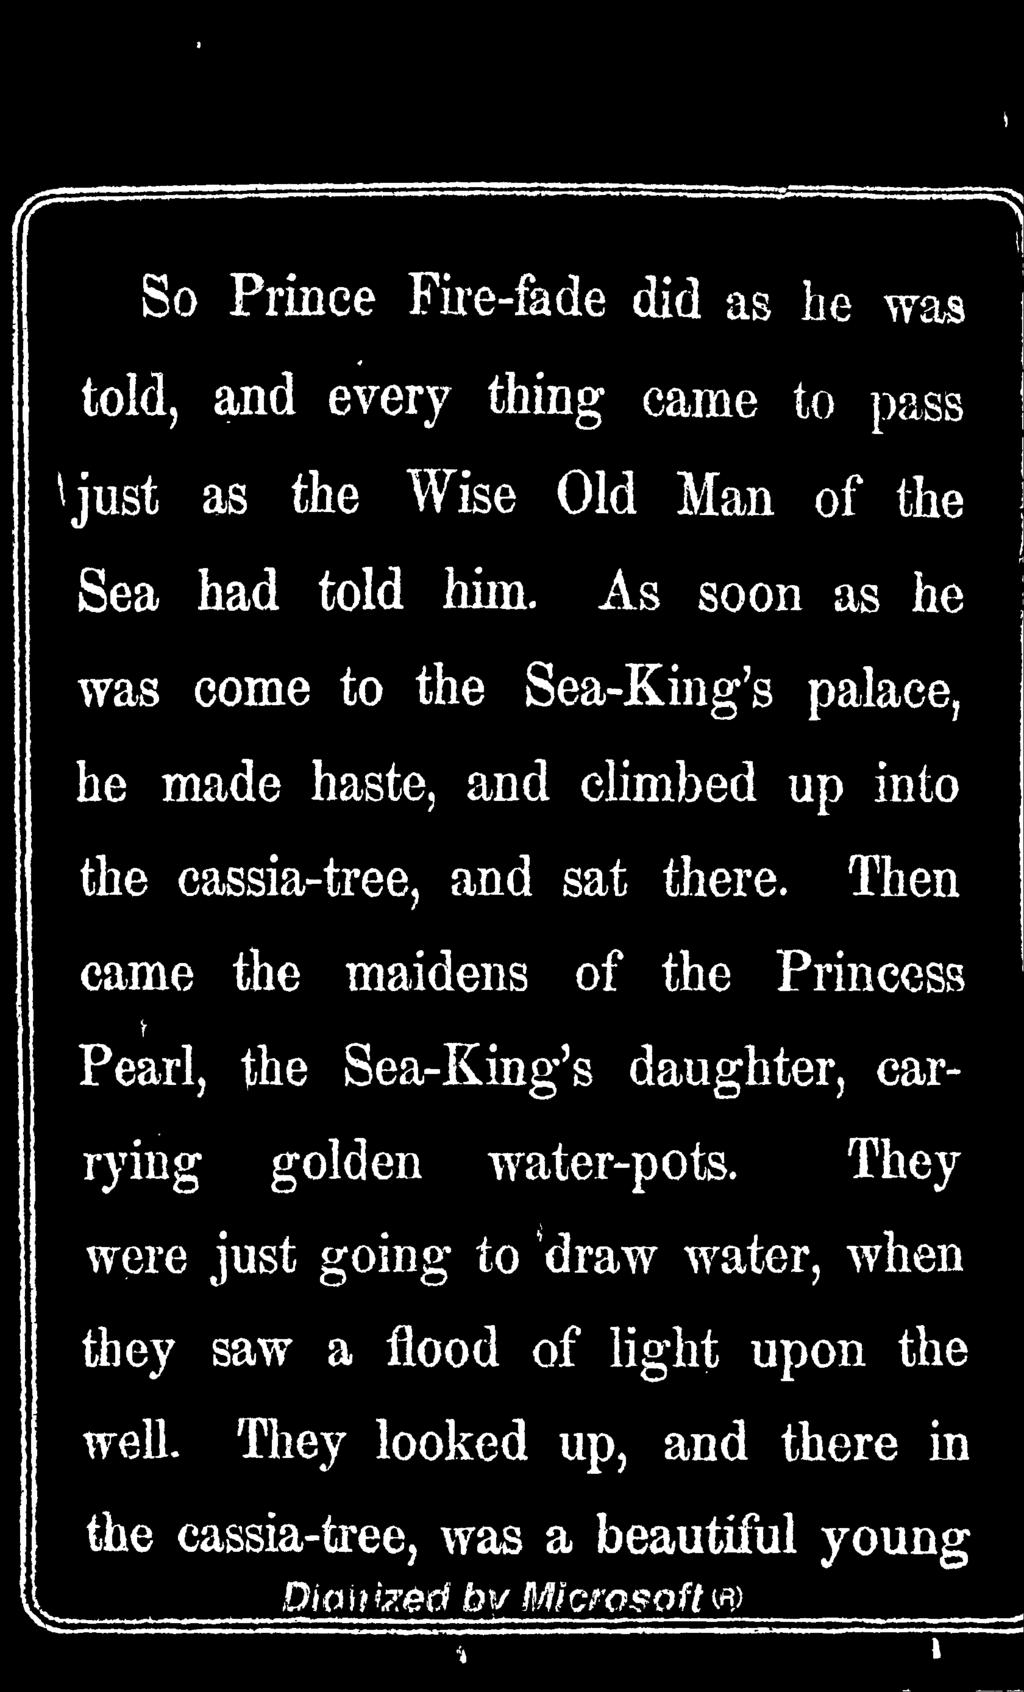 Then came the maidens of the Princess Pearl, the Sea-King's daughter, carrying